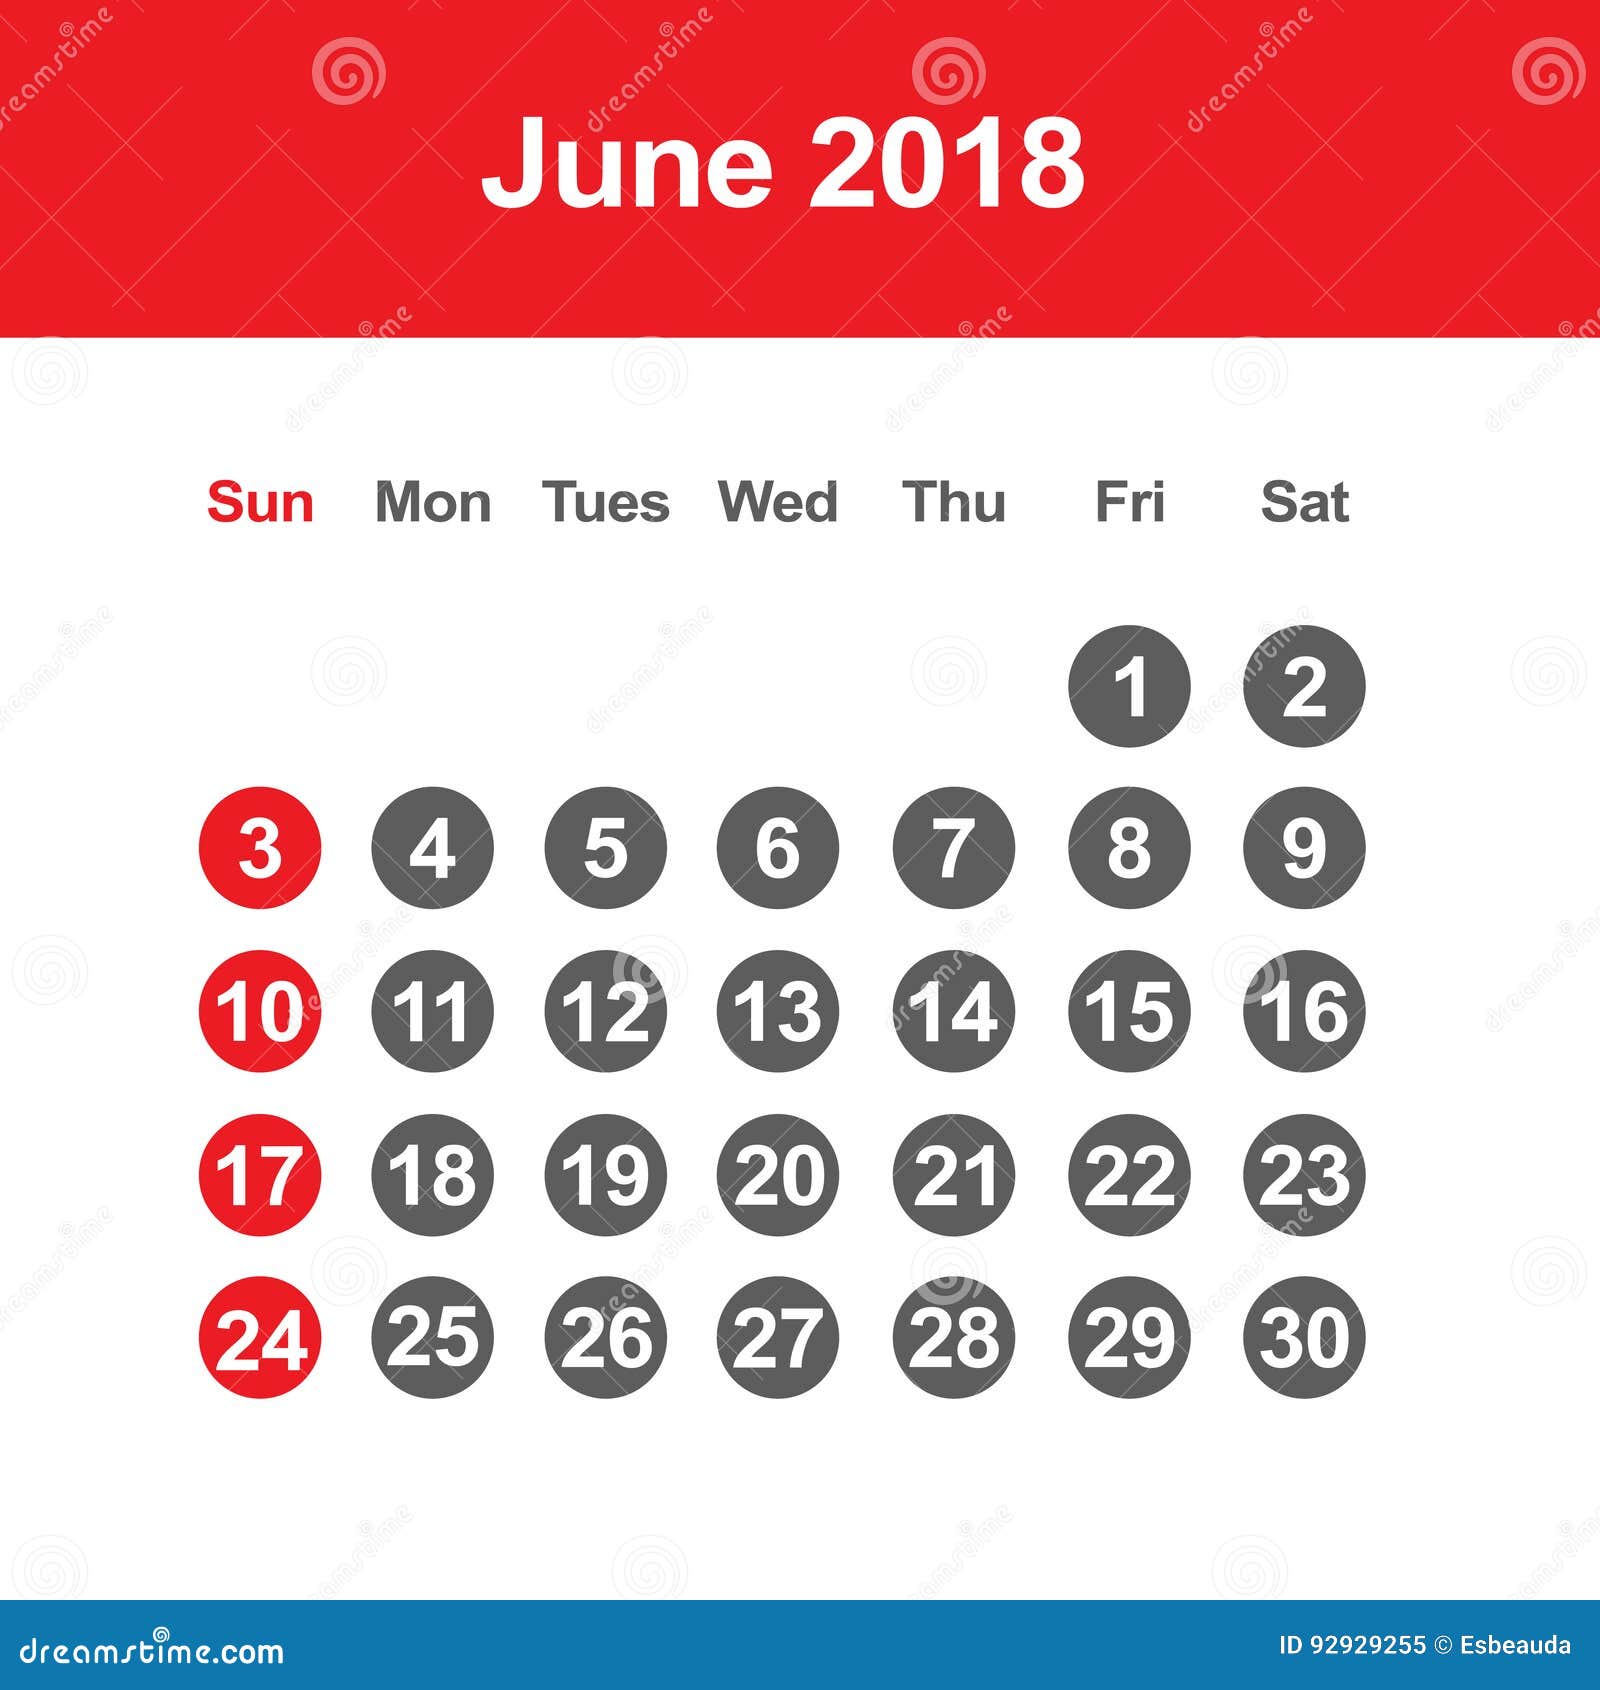 june-2018-calendar-templates-for-word-excel-and-pdf